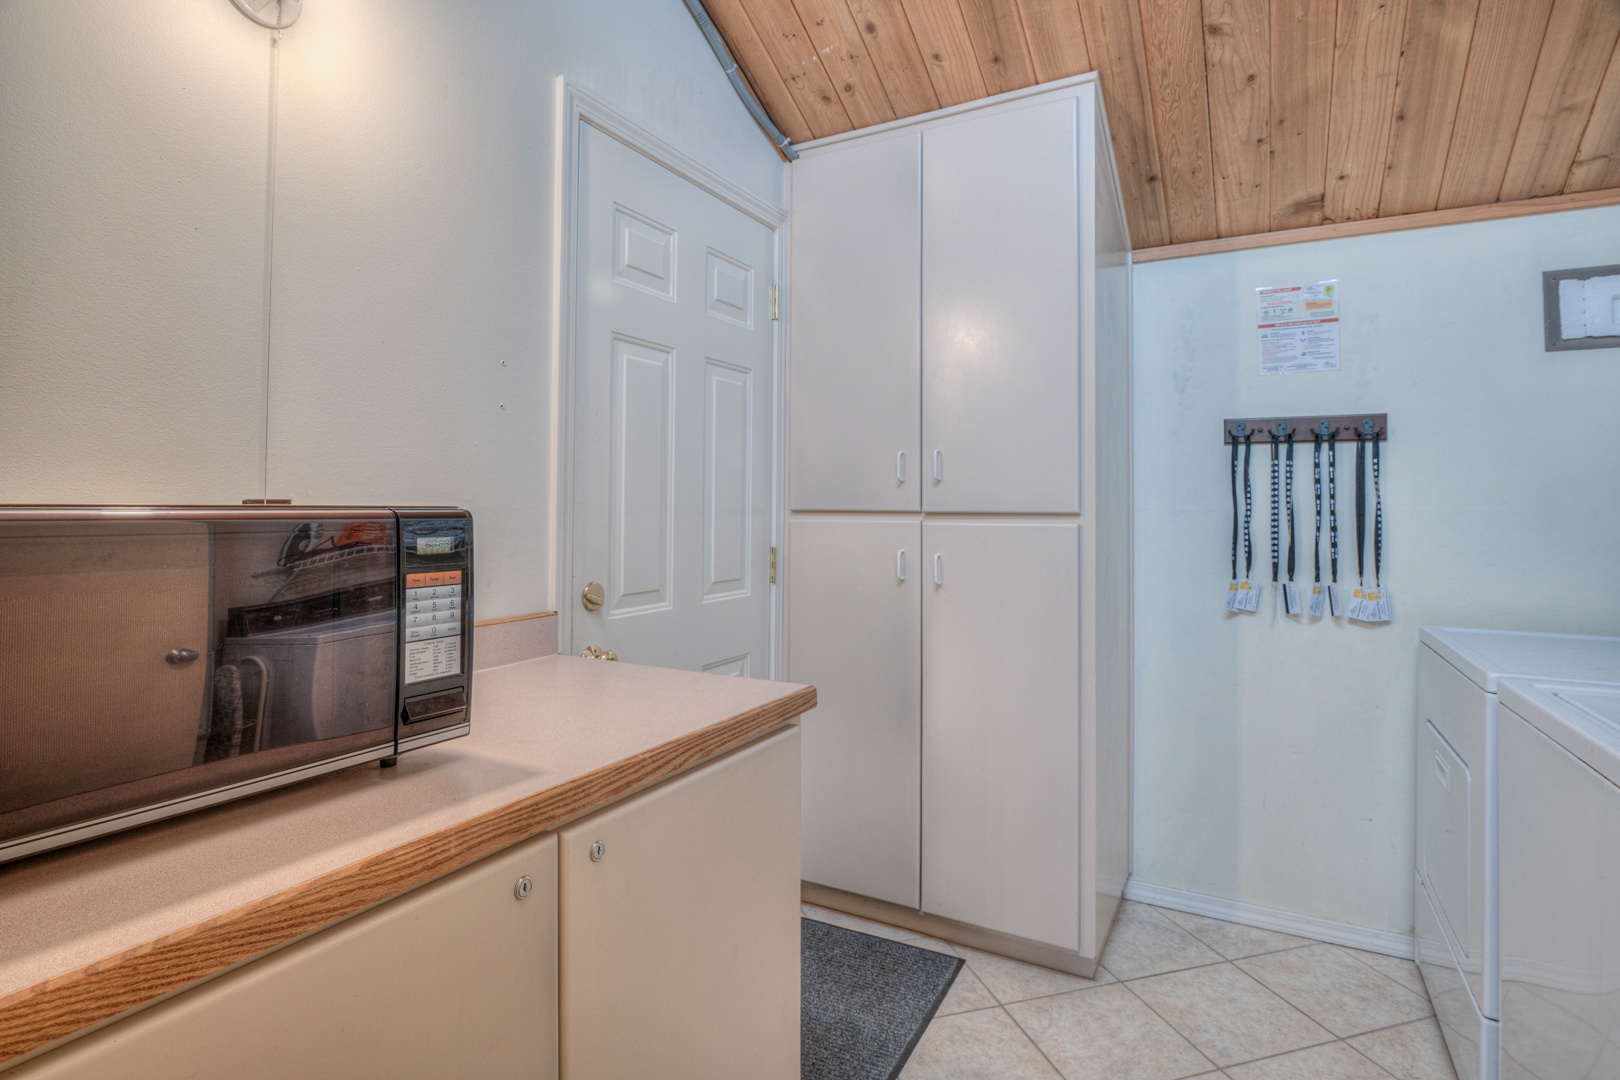 Laundry room and Butlers Pantry